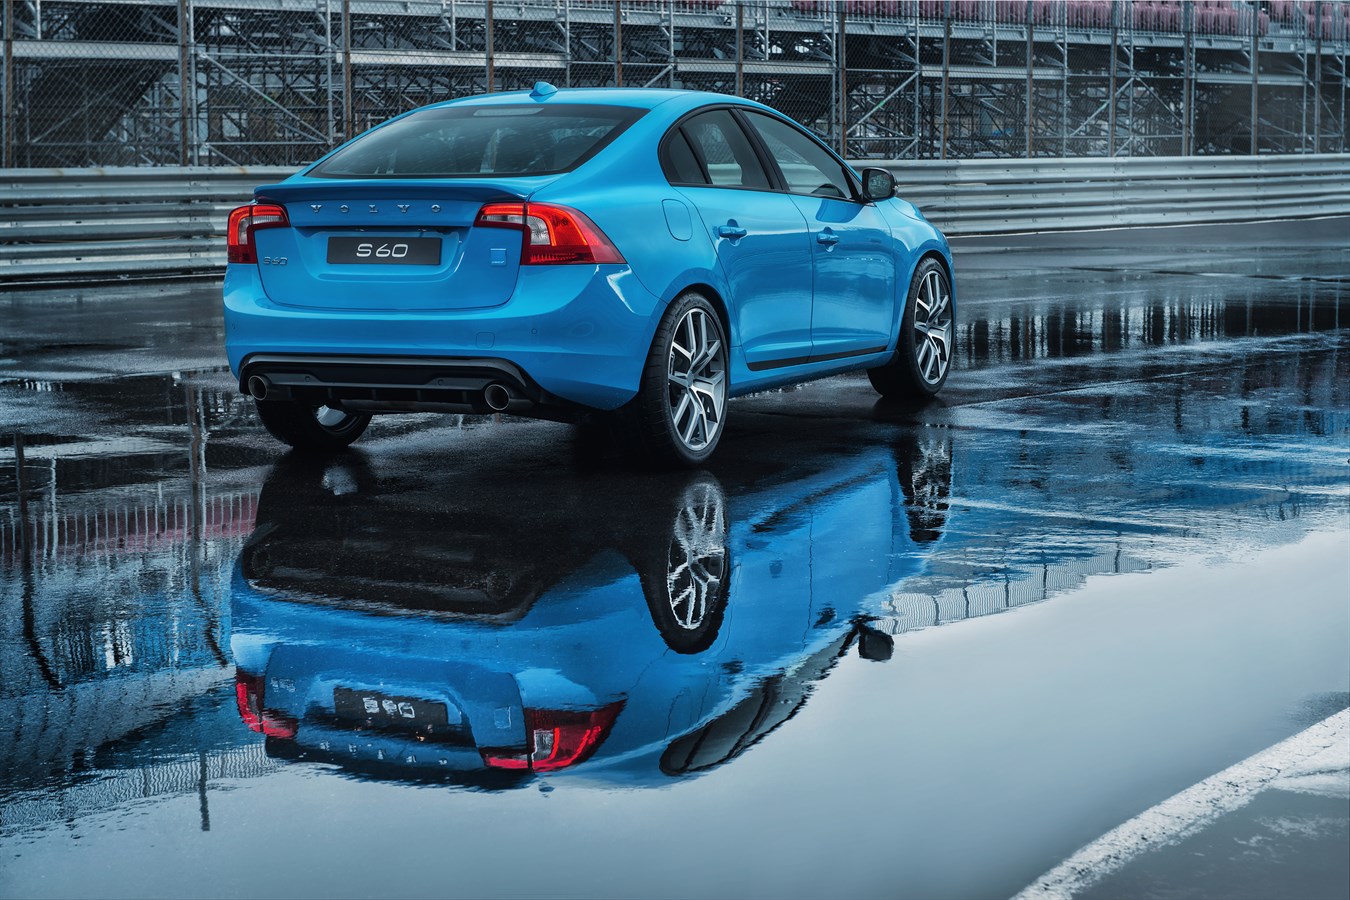 The new Volvo S60 and Polestar are here: world for a new Volvo V60 engineered by Polestar - Volvo Cars Global Media Newsroom